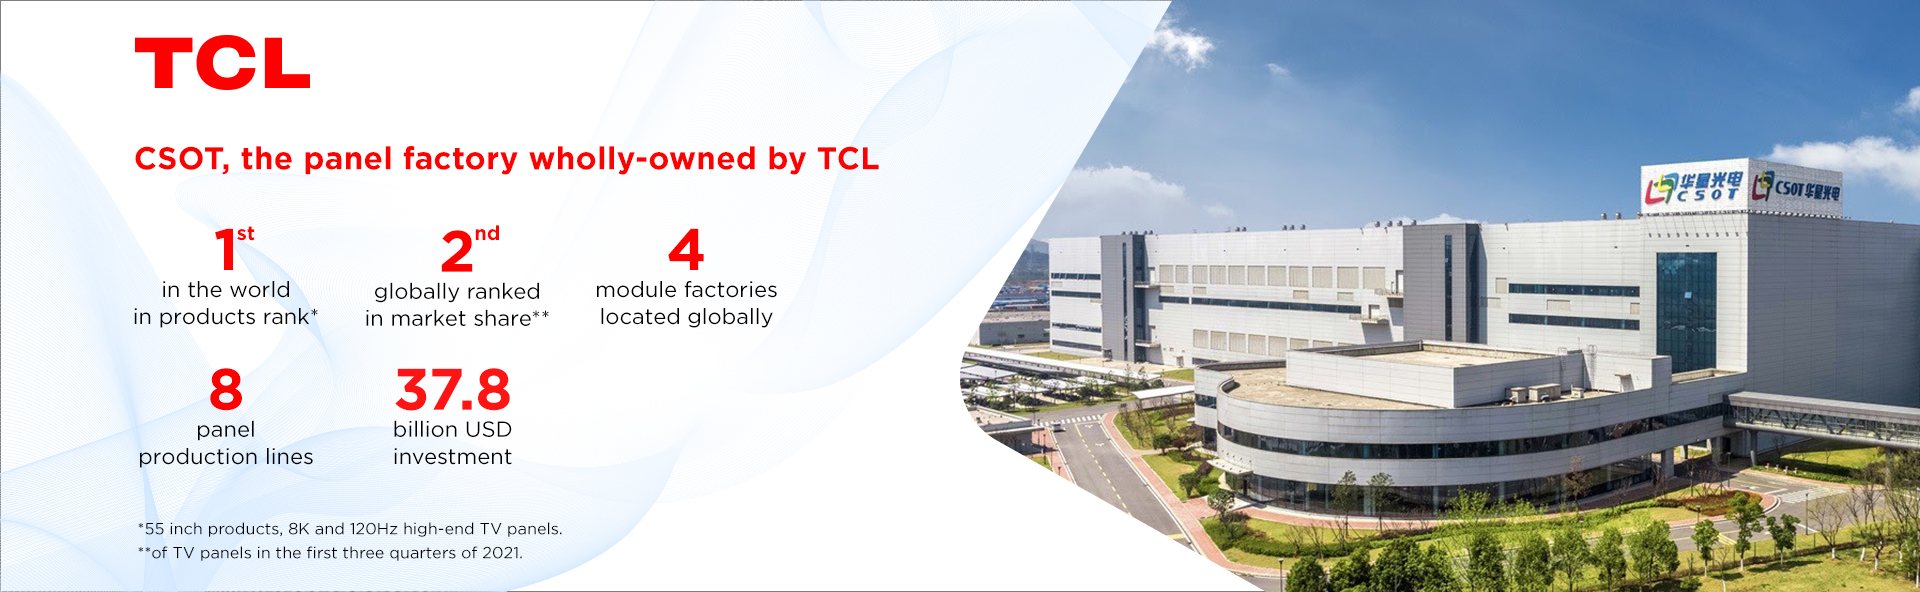 TCL Brand story